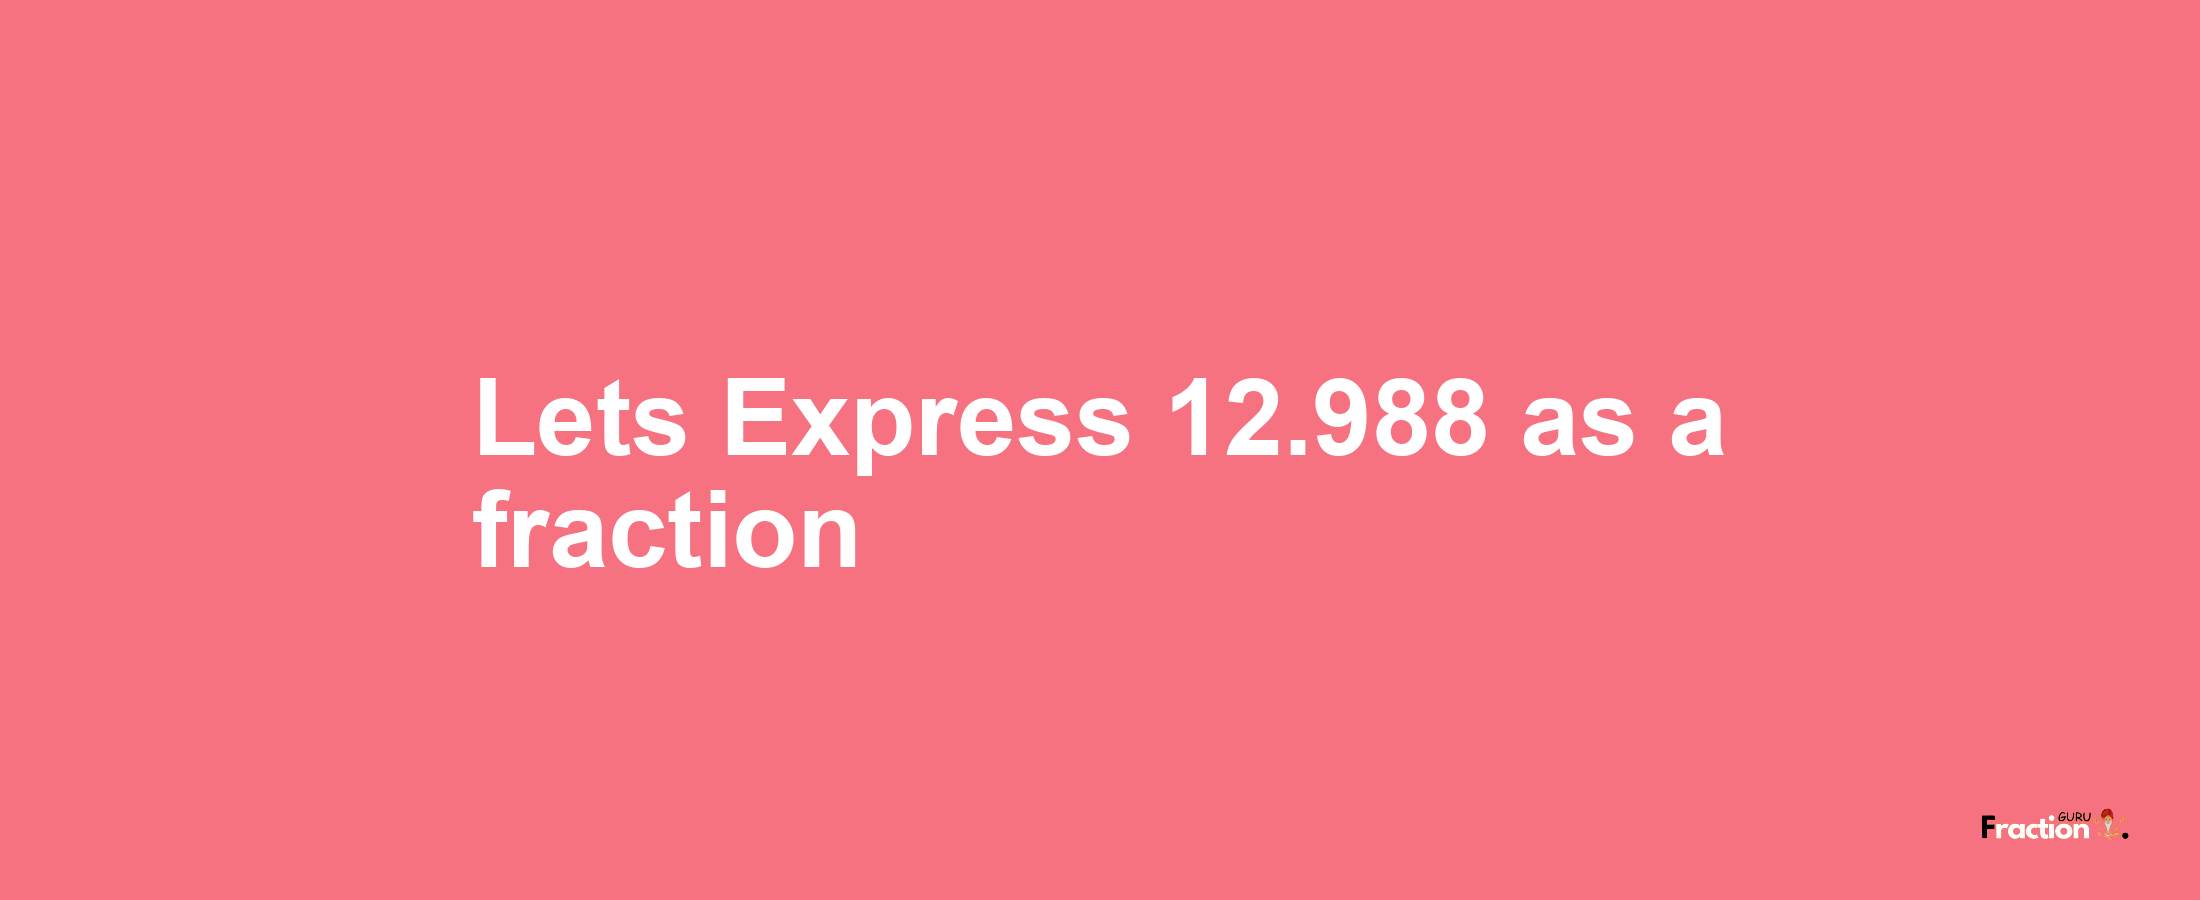 Lets Express 12.988 as afraction